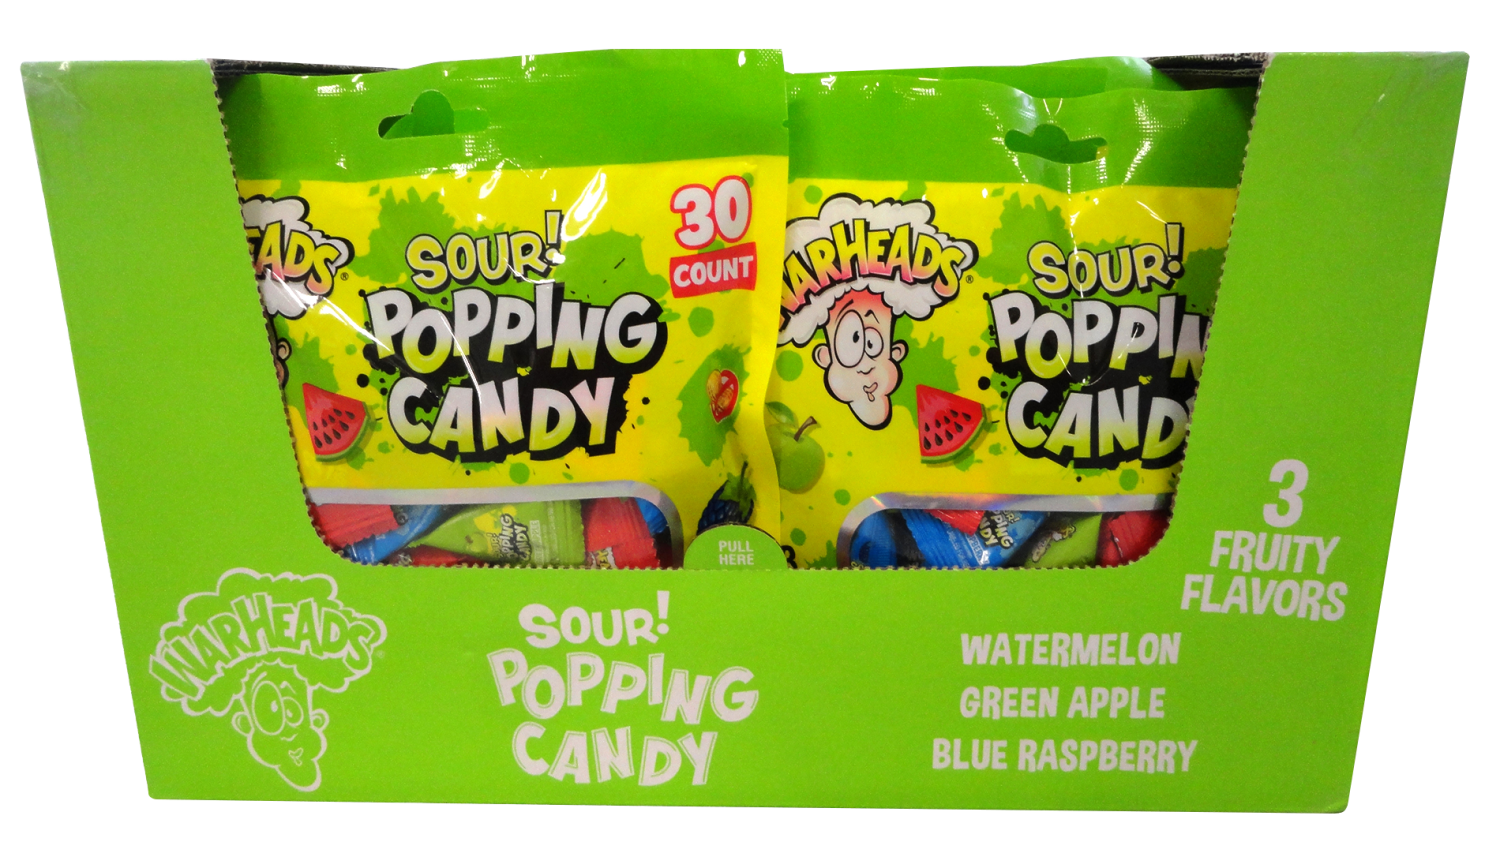 Waheads Warheads 30ct. Popping Candy Gusset Bag 3.17oz. 